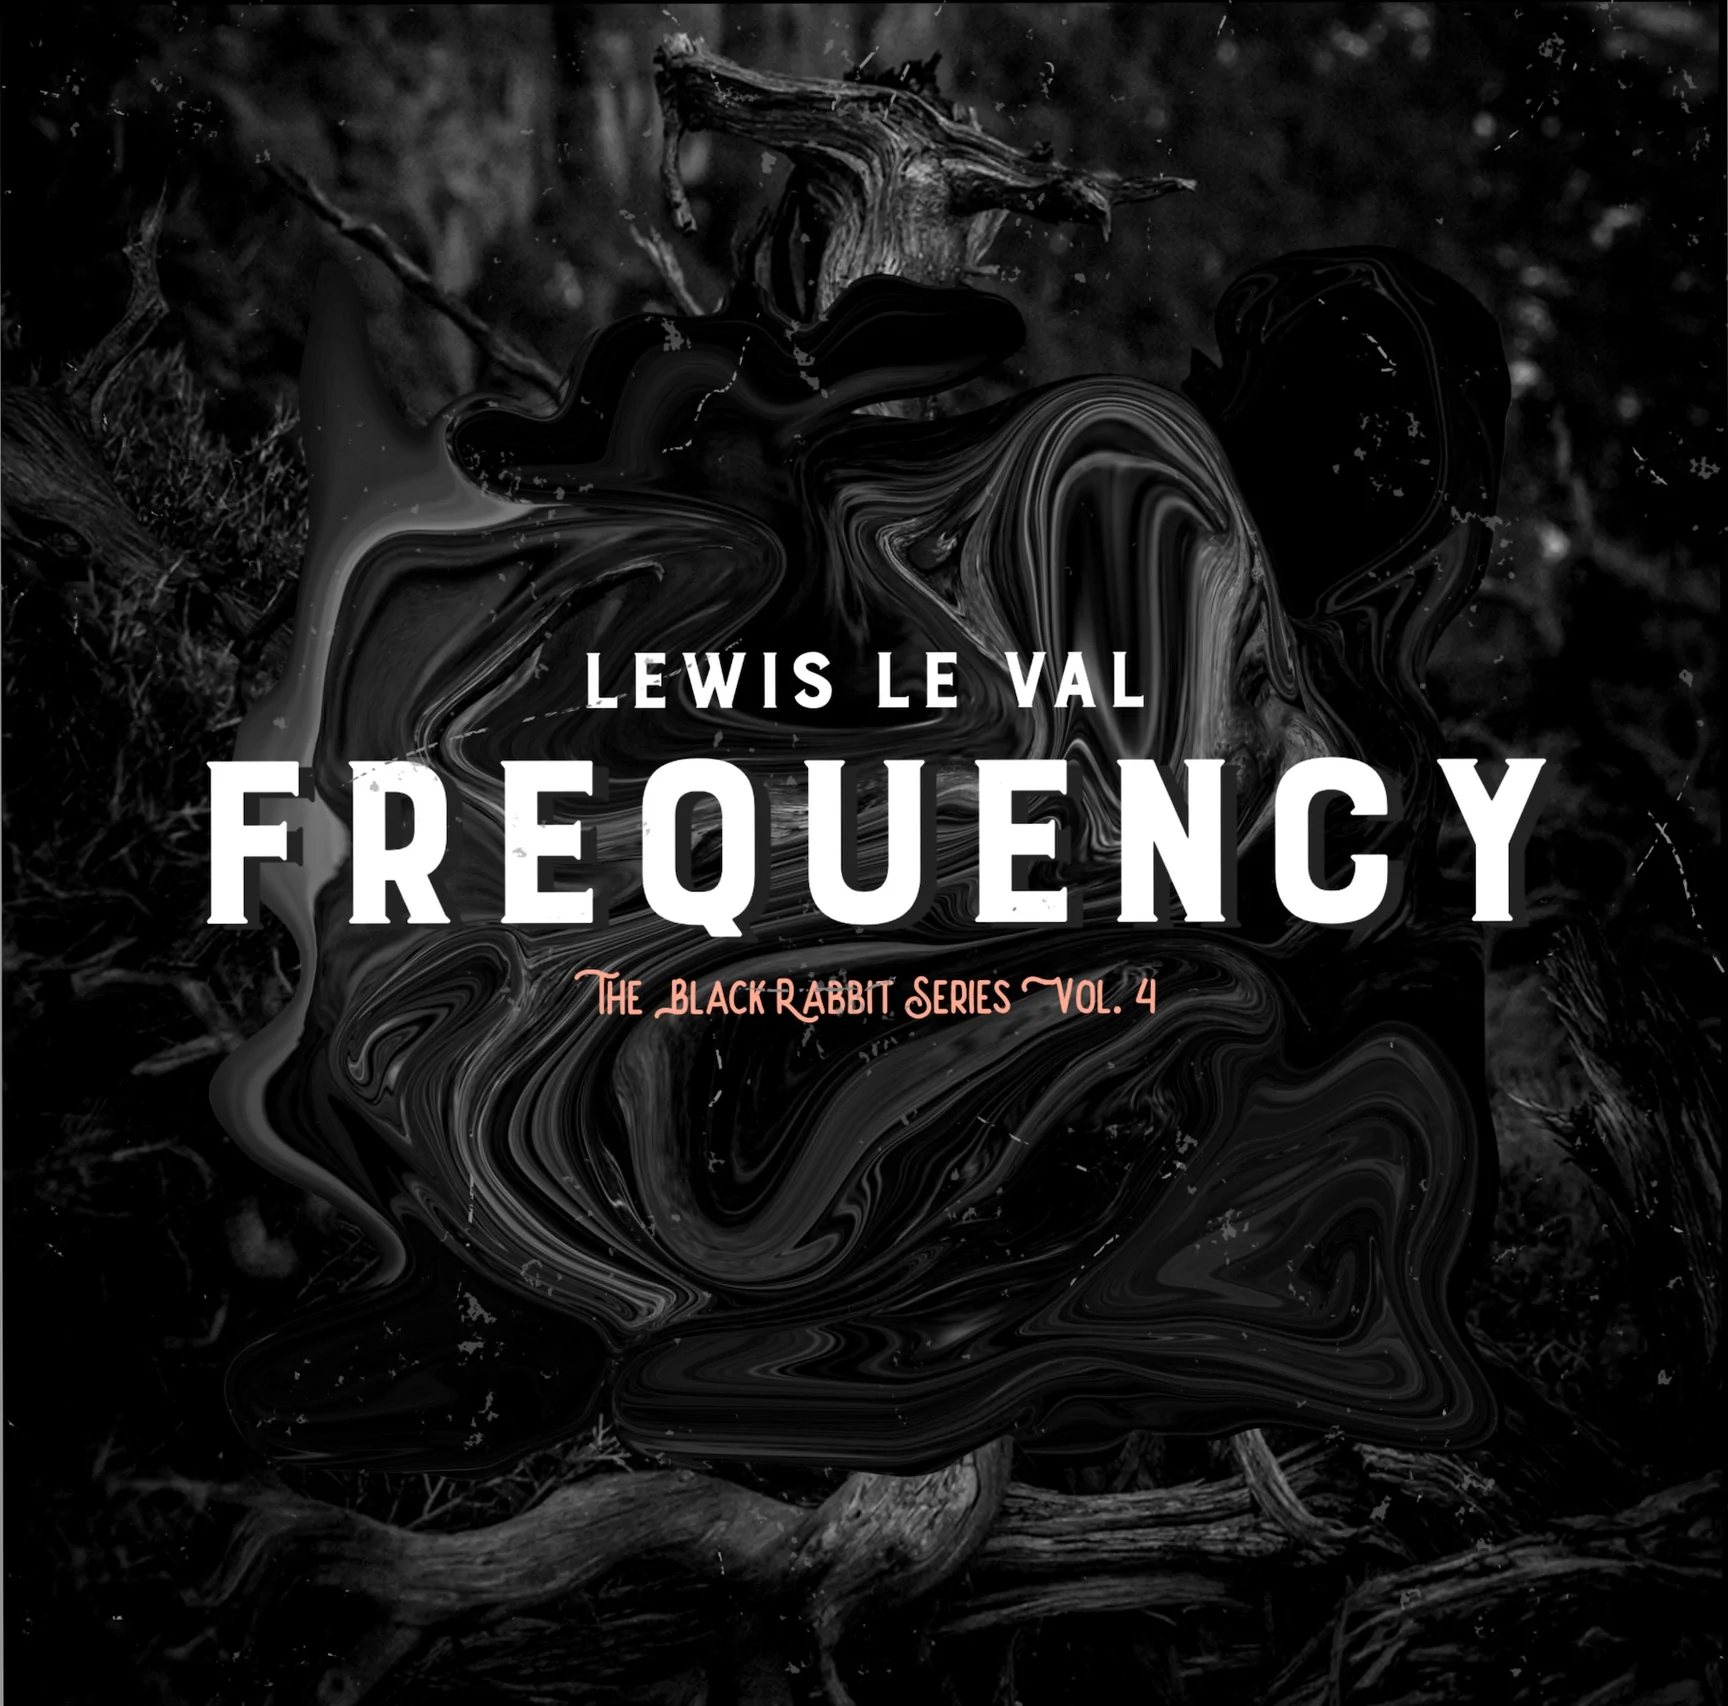 Black Rabbit Vol 4 Frequency by Lewis Le Val (Mp4 Video + PDF Full Magic Download)